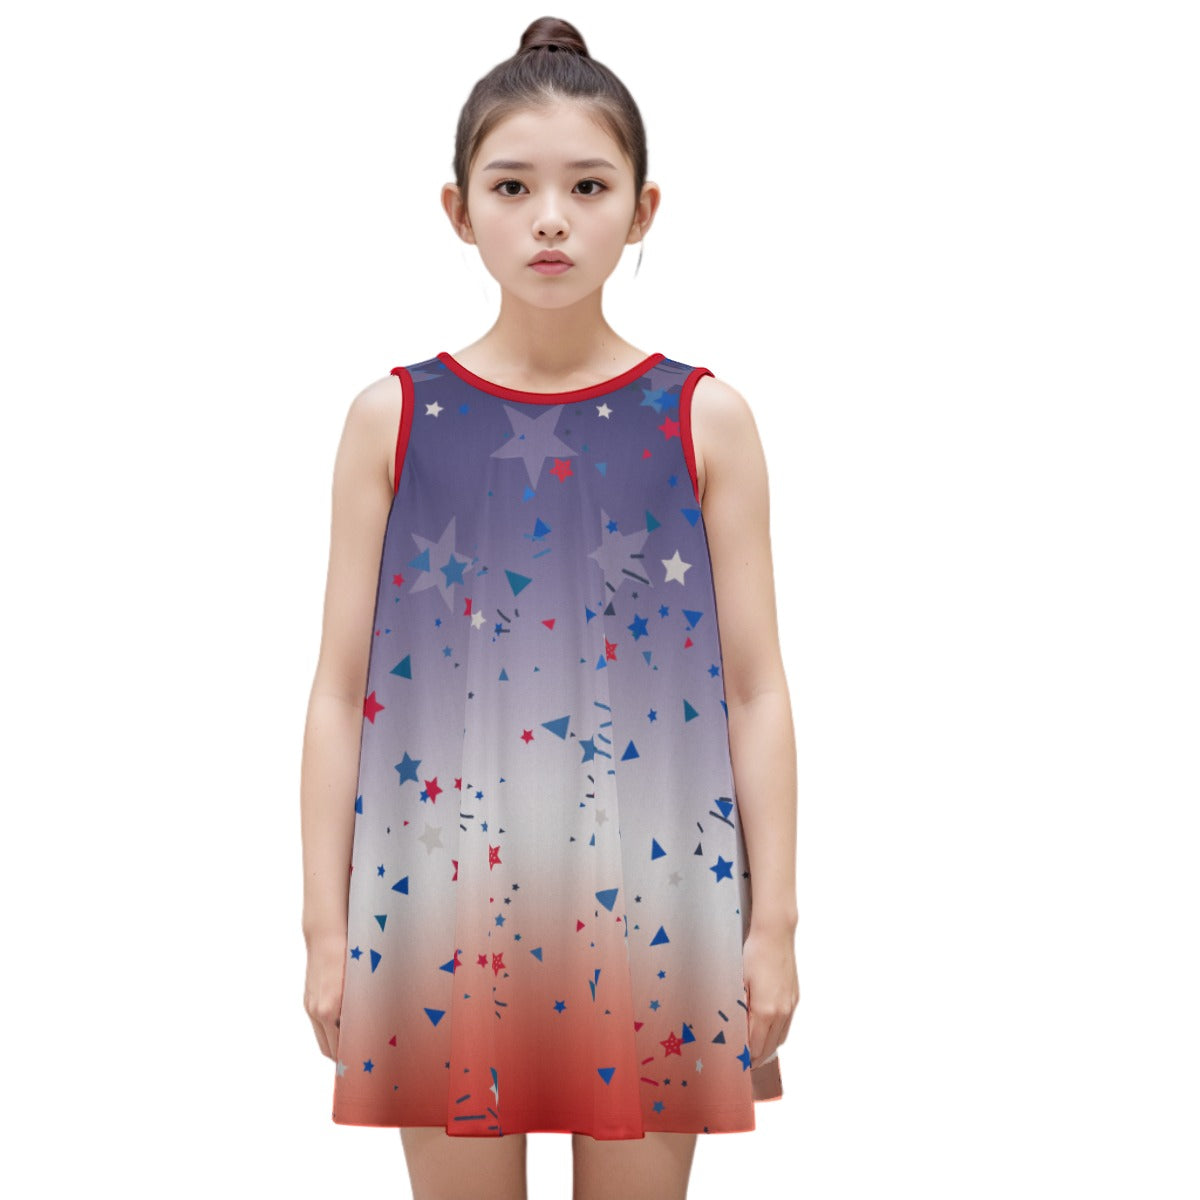 RED WHITE BLUE - Ombre Patriotic Kid's Sleeveless Dress | 100% Cotton - girls dress at TFC&H Co.